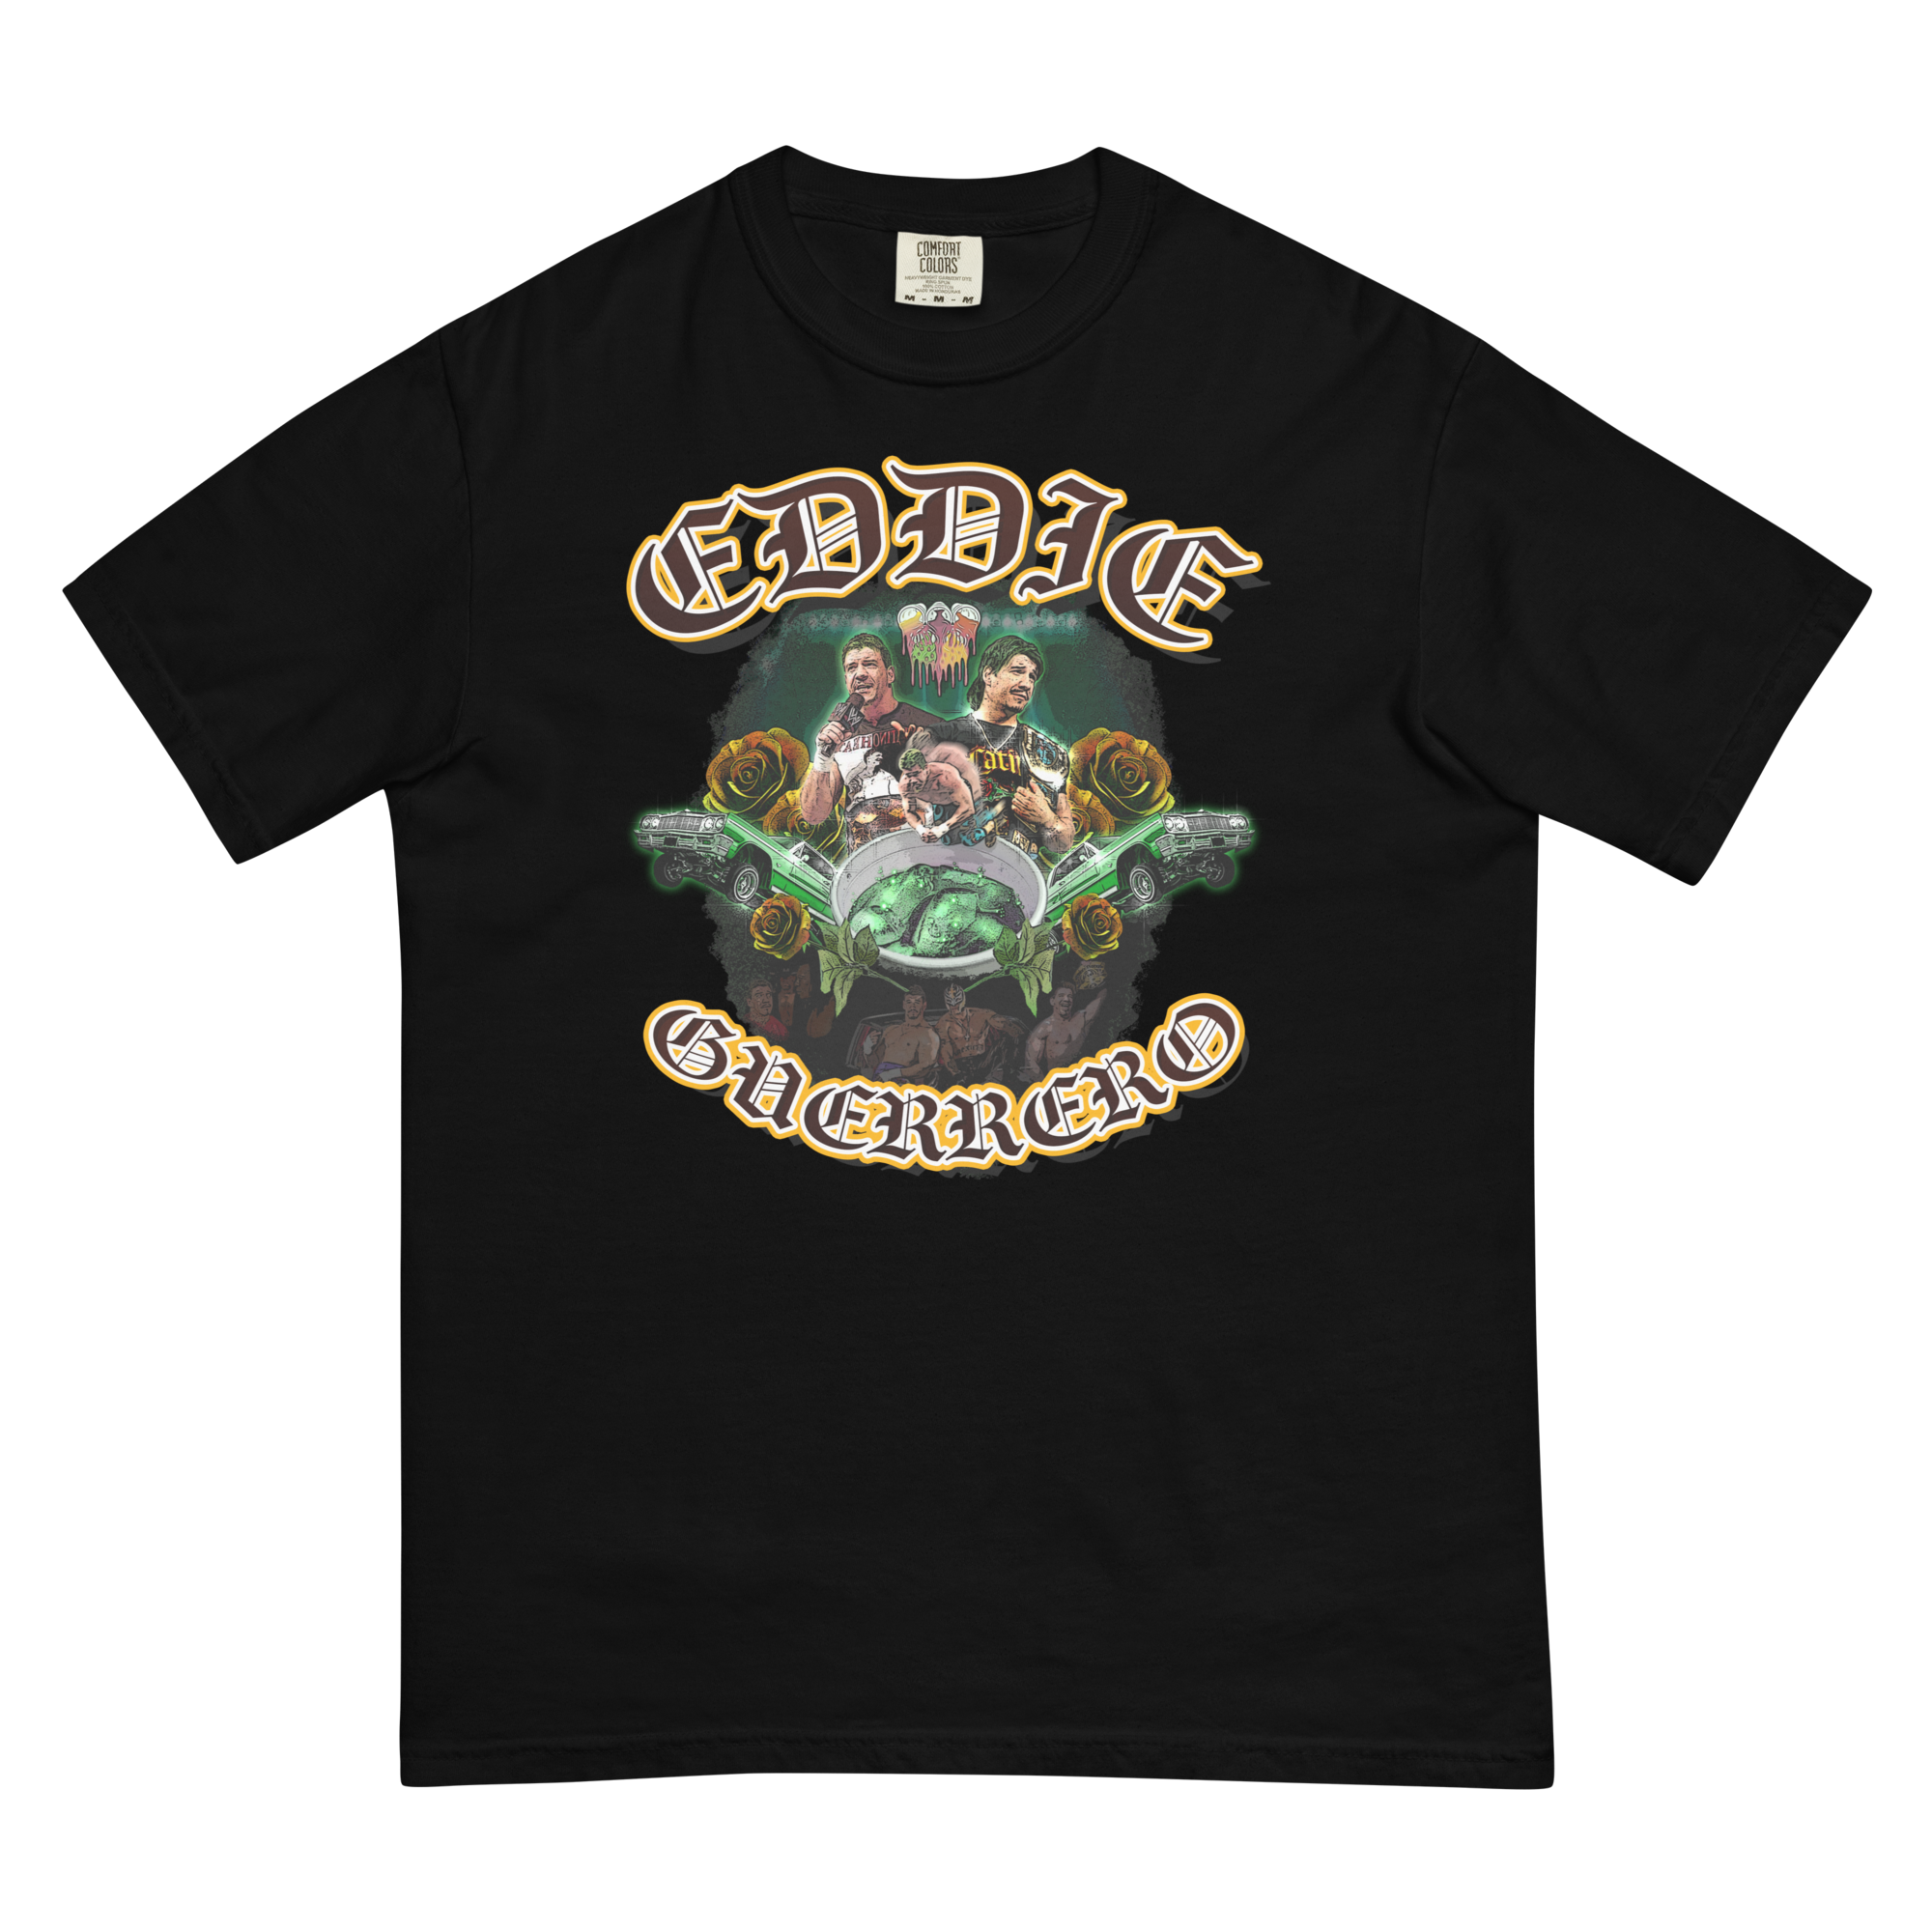 Black Olympic Sippers Eddie Guerrero Tee – SOUL'DOUT